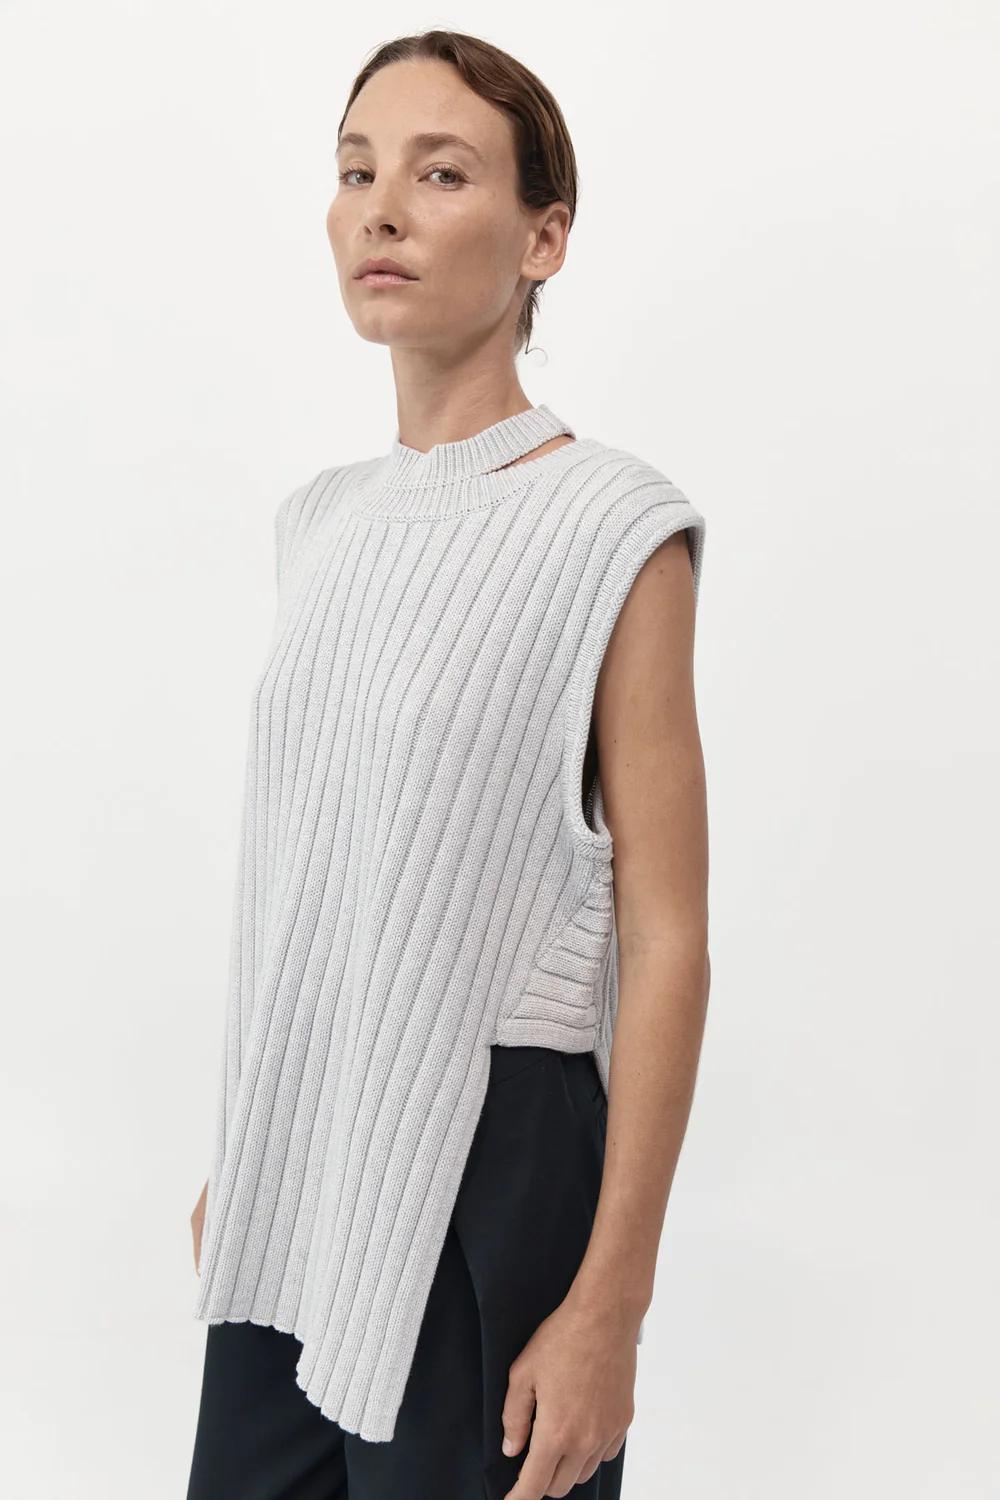 Product Image for Deconstructed Rib Knit Tunic, Soft Grey